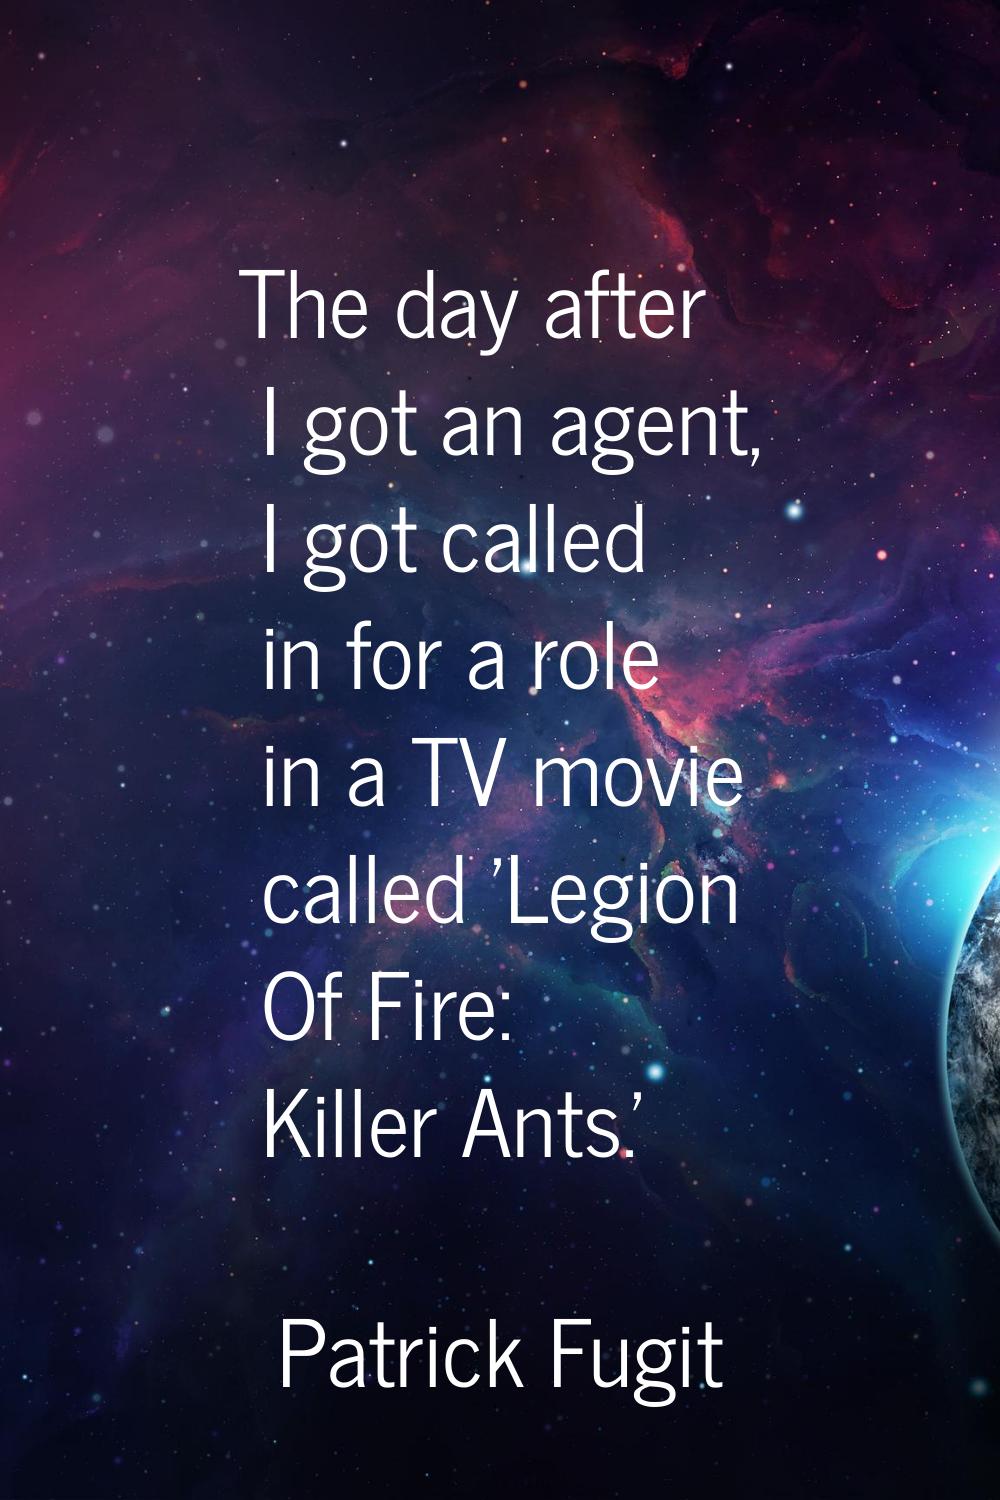 The day after I got an agent, I got called in for a role in a TV movie called 'Legion Of Fire: Kill